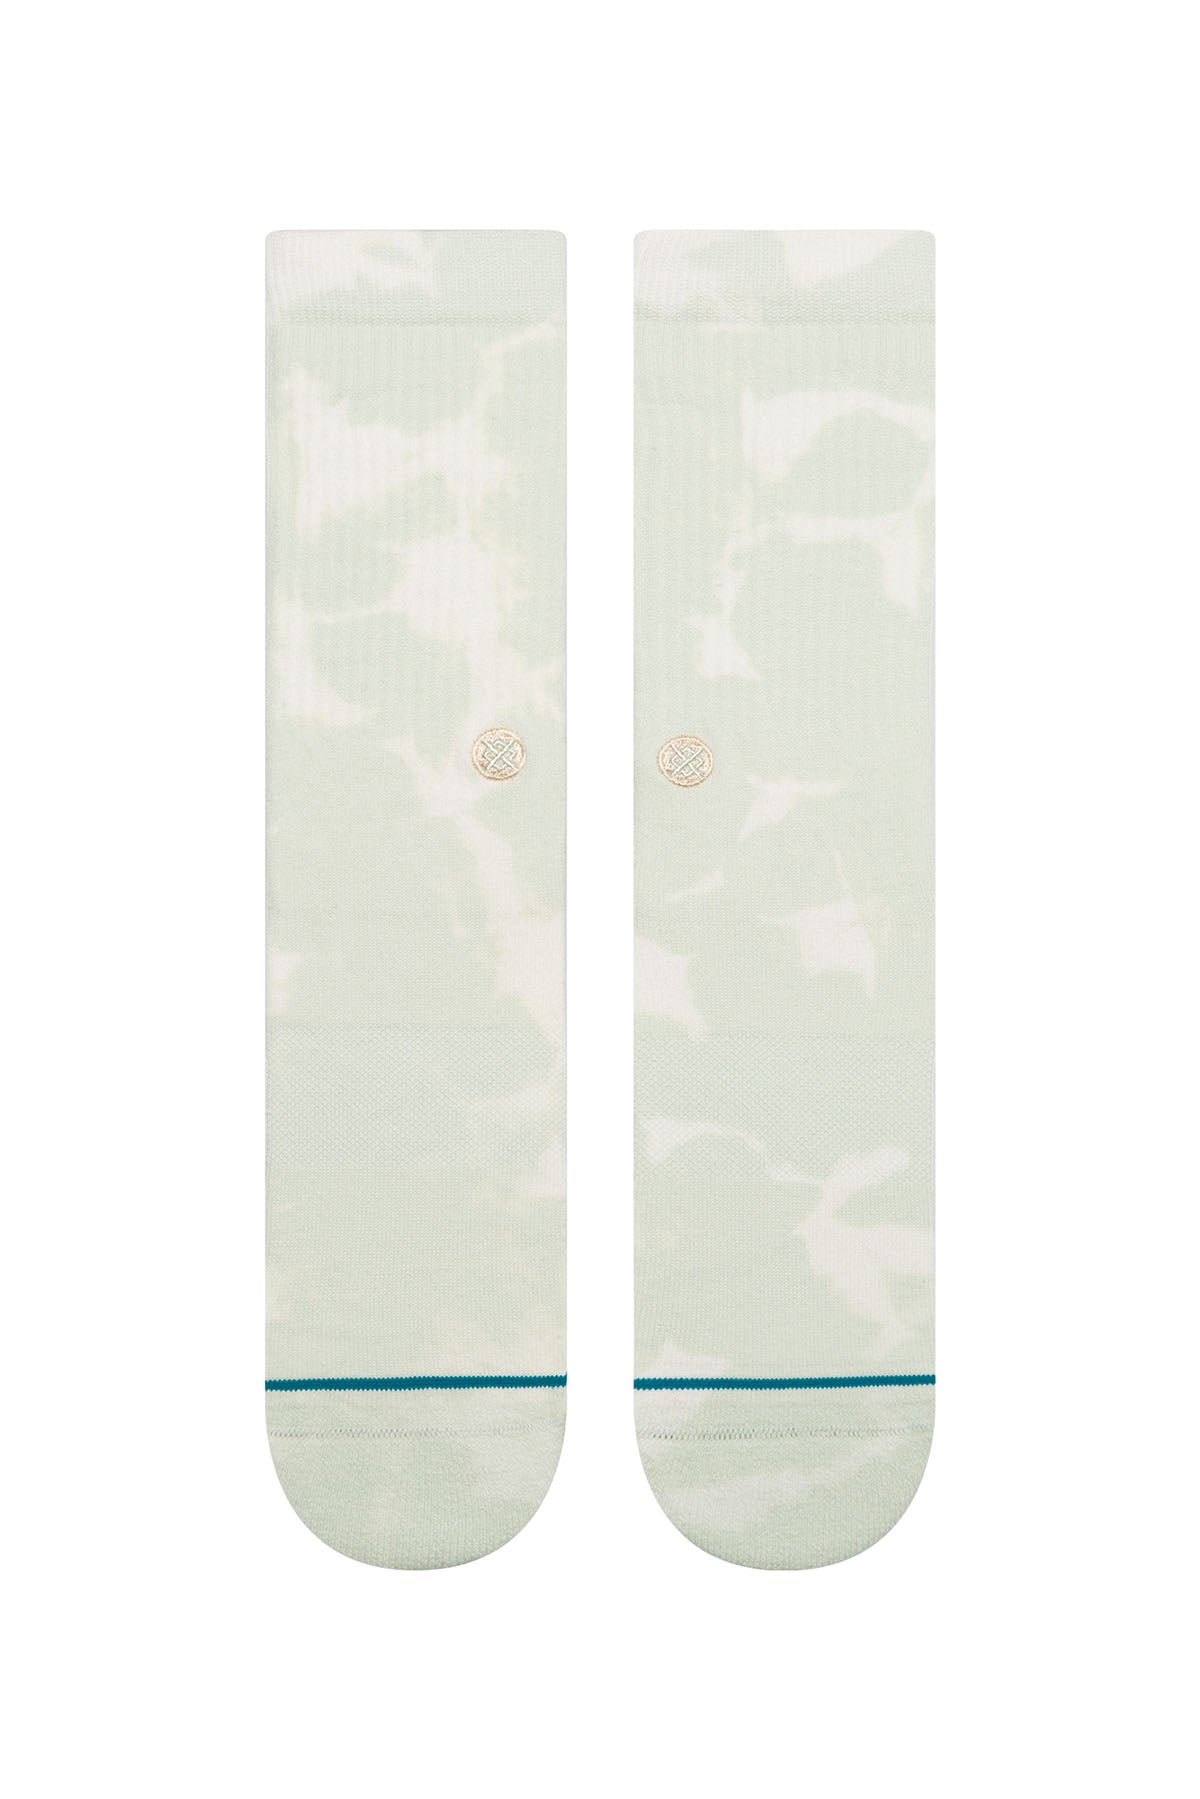 Stance - Icon Dye - Light Blue - Front